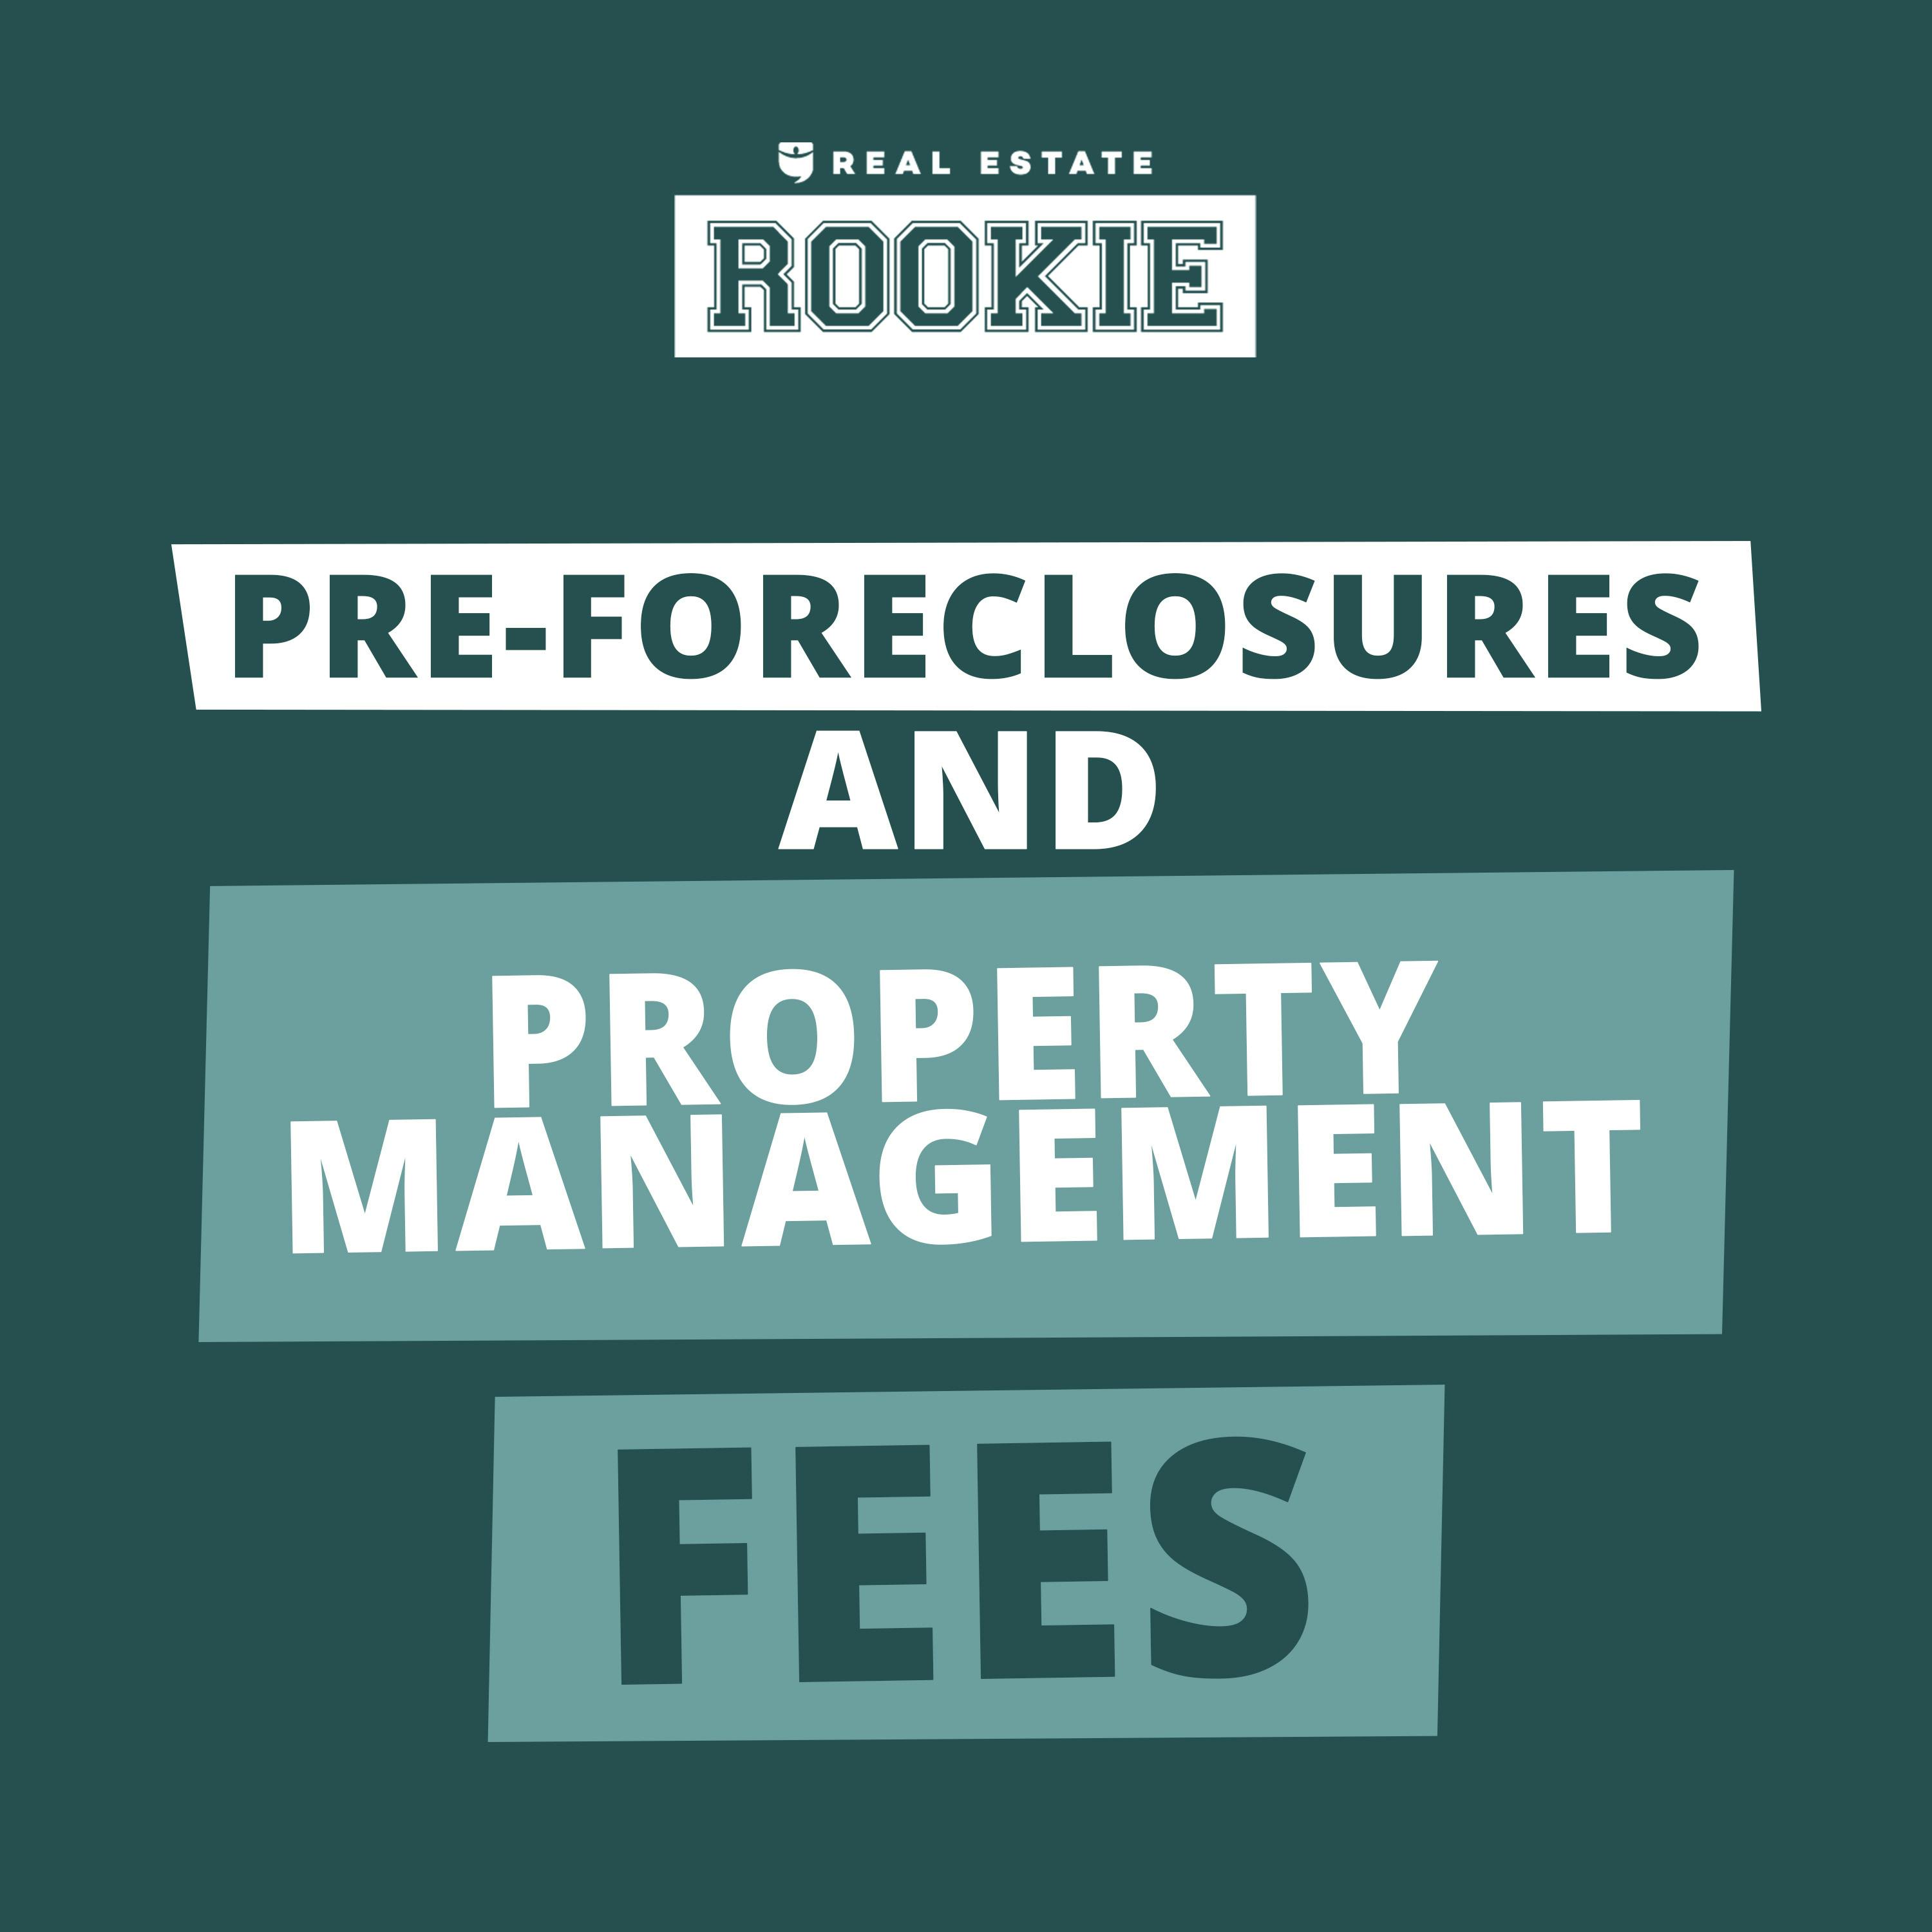 296: Rookie Reply: Pre-Foreclosures and How to Cut Your Property Management Costs